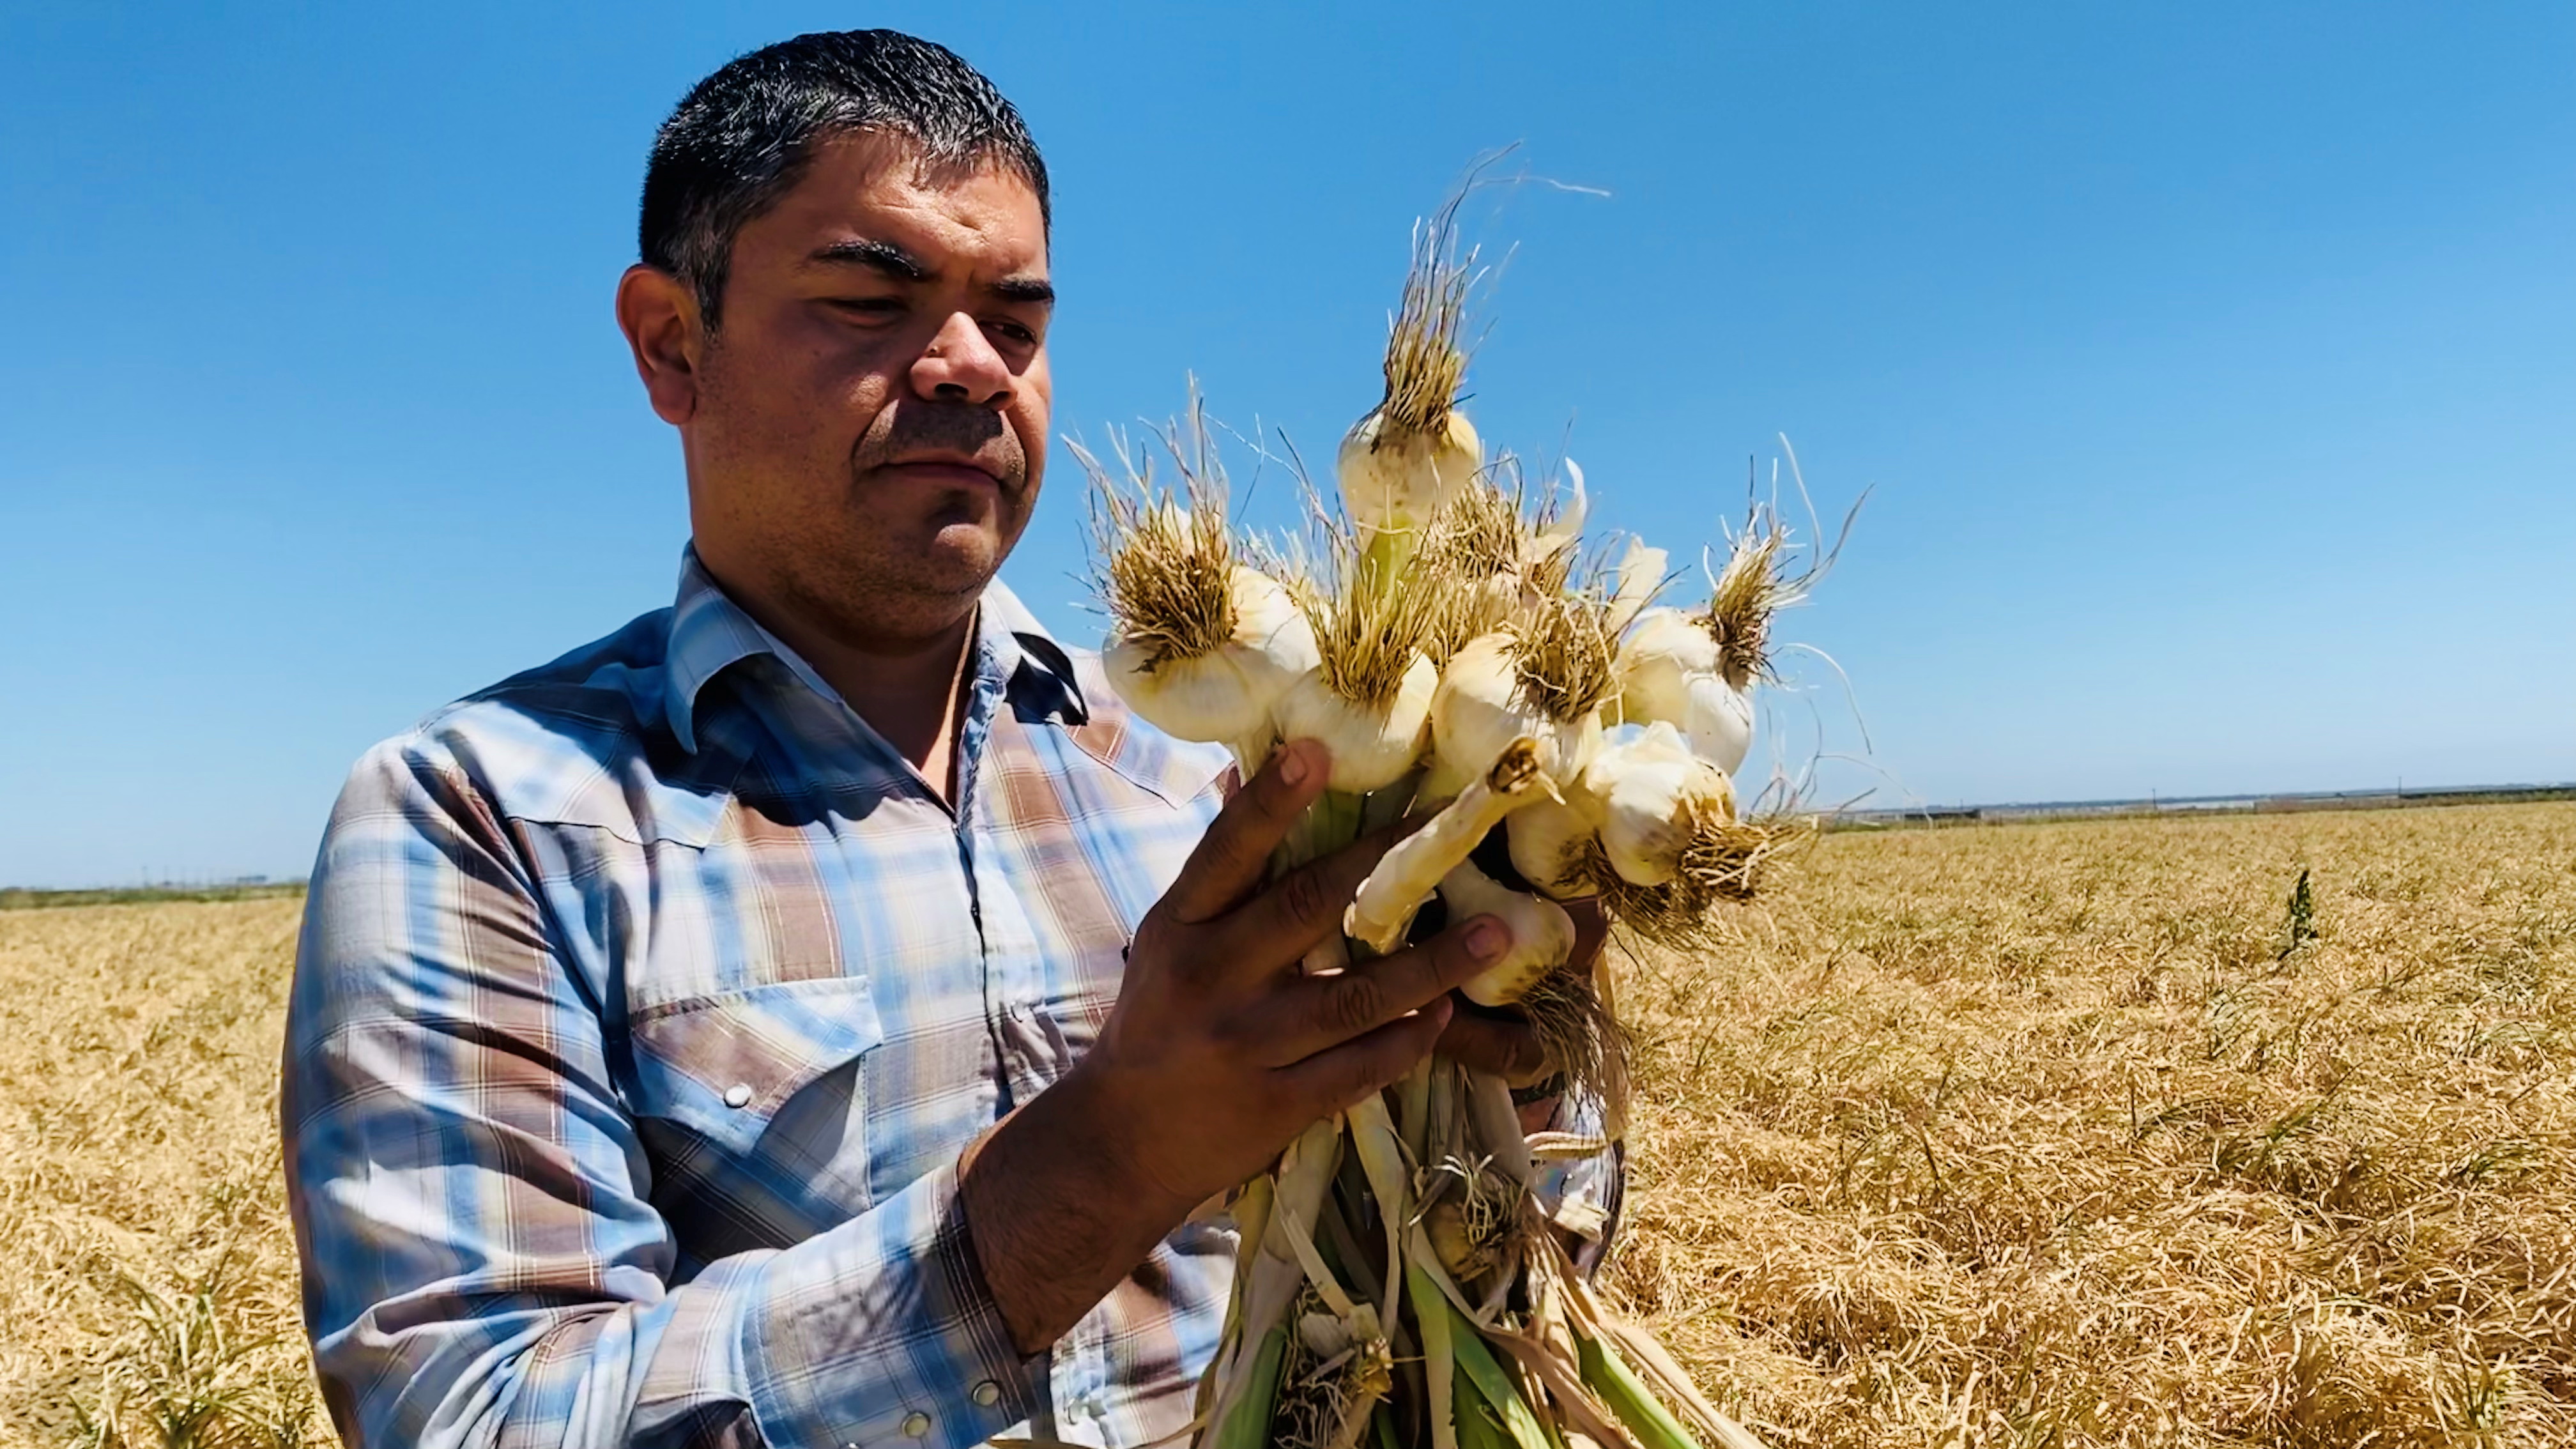 &copy; Reuters. Salvador Parra, manager at Burford Ranch, is seen with a garlic crop he is preparing to harvest and sell, in Cantua Creek, California, U.S. June 15, 2021. Photo taken June 15, 2021. REUTERS/Norma Galeana